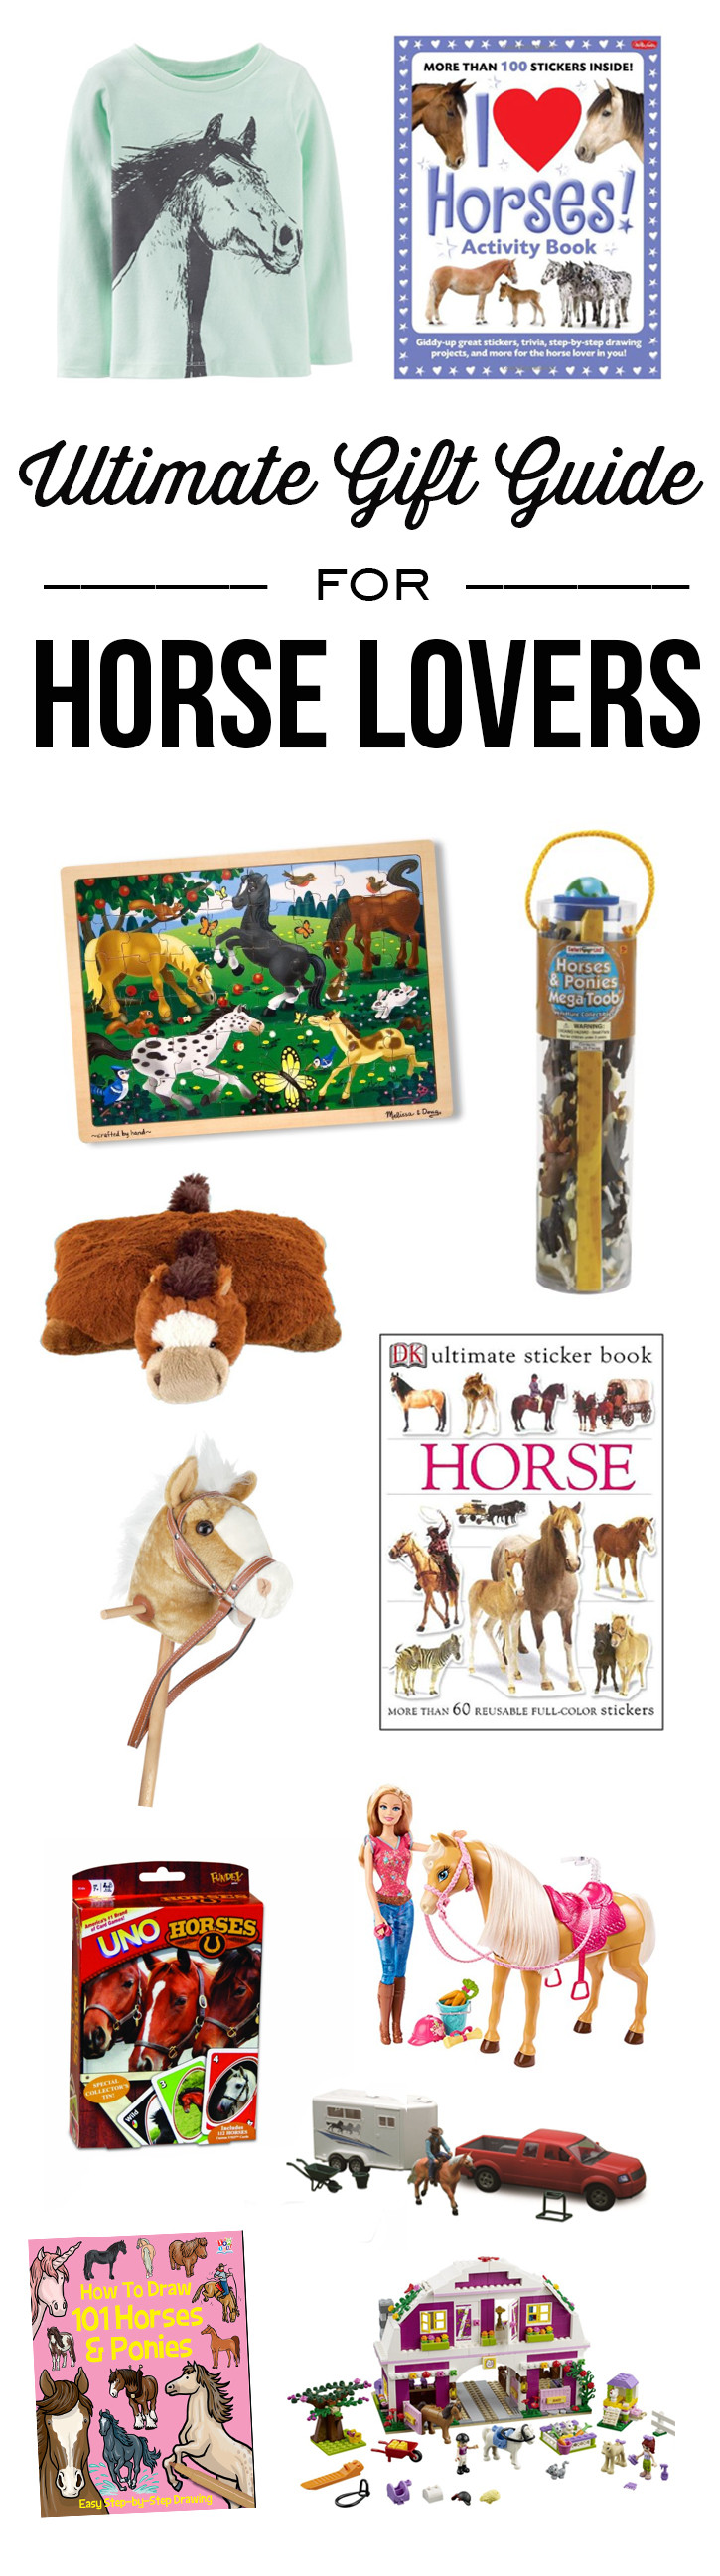 Gift Ideas For Horse Lovers
 The Ultimate Gift Guide for Horse Lovers